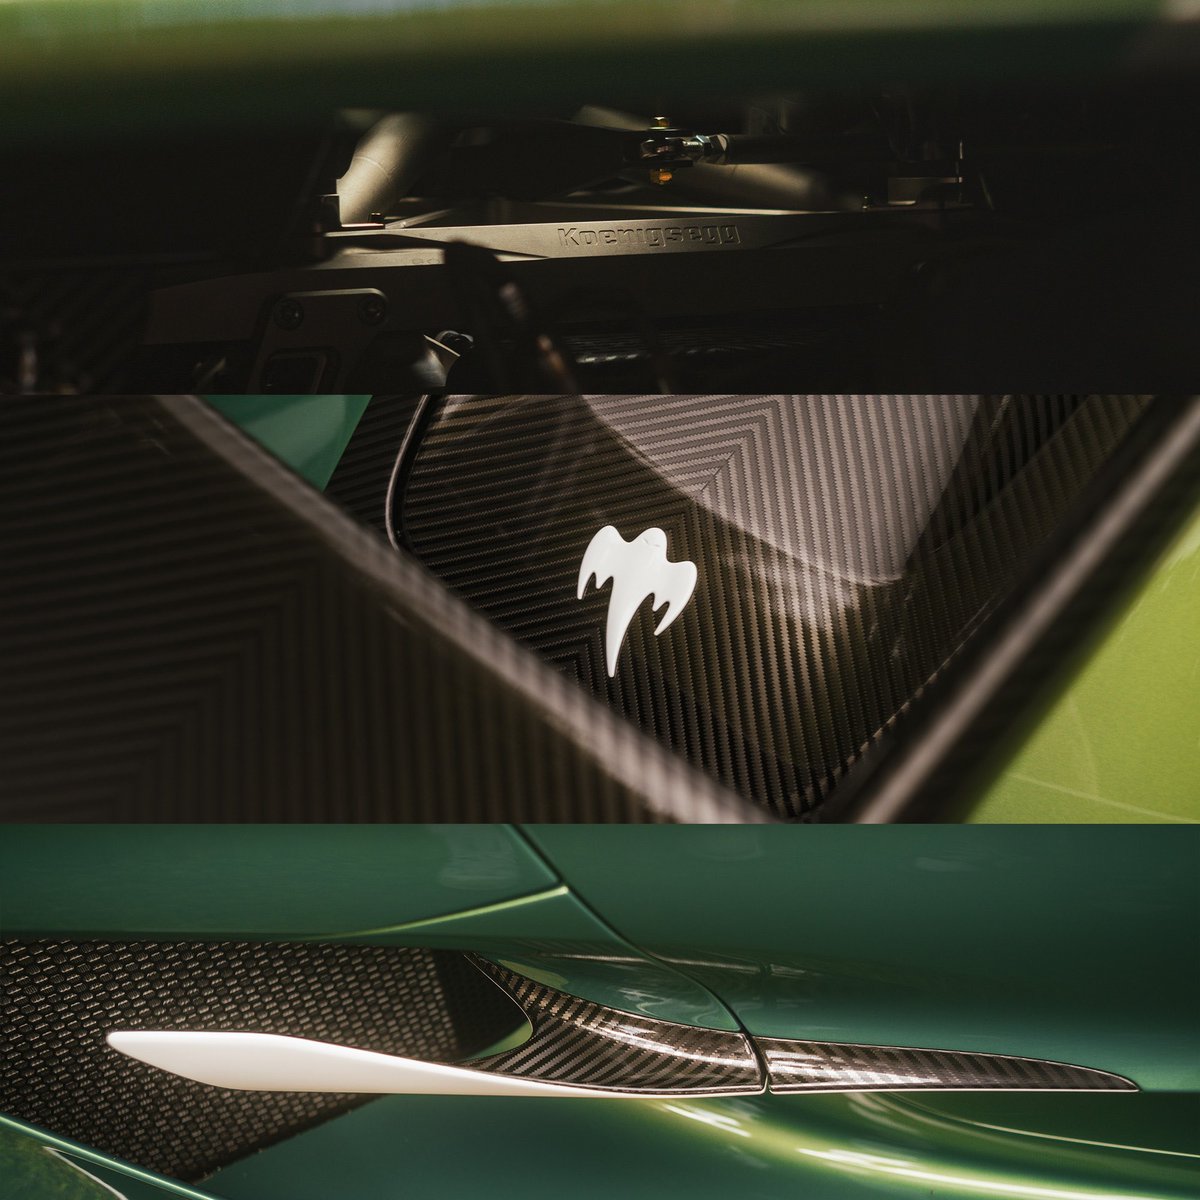 Love these shots I took of the Koenigsegg Jesko at Fuori Concorso last weekend.

This thing is truly a work of art.